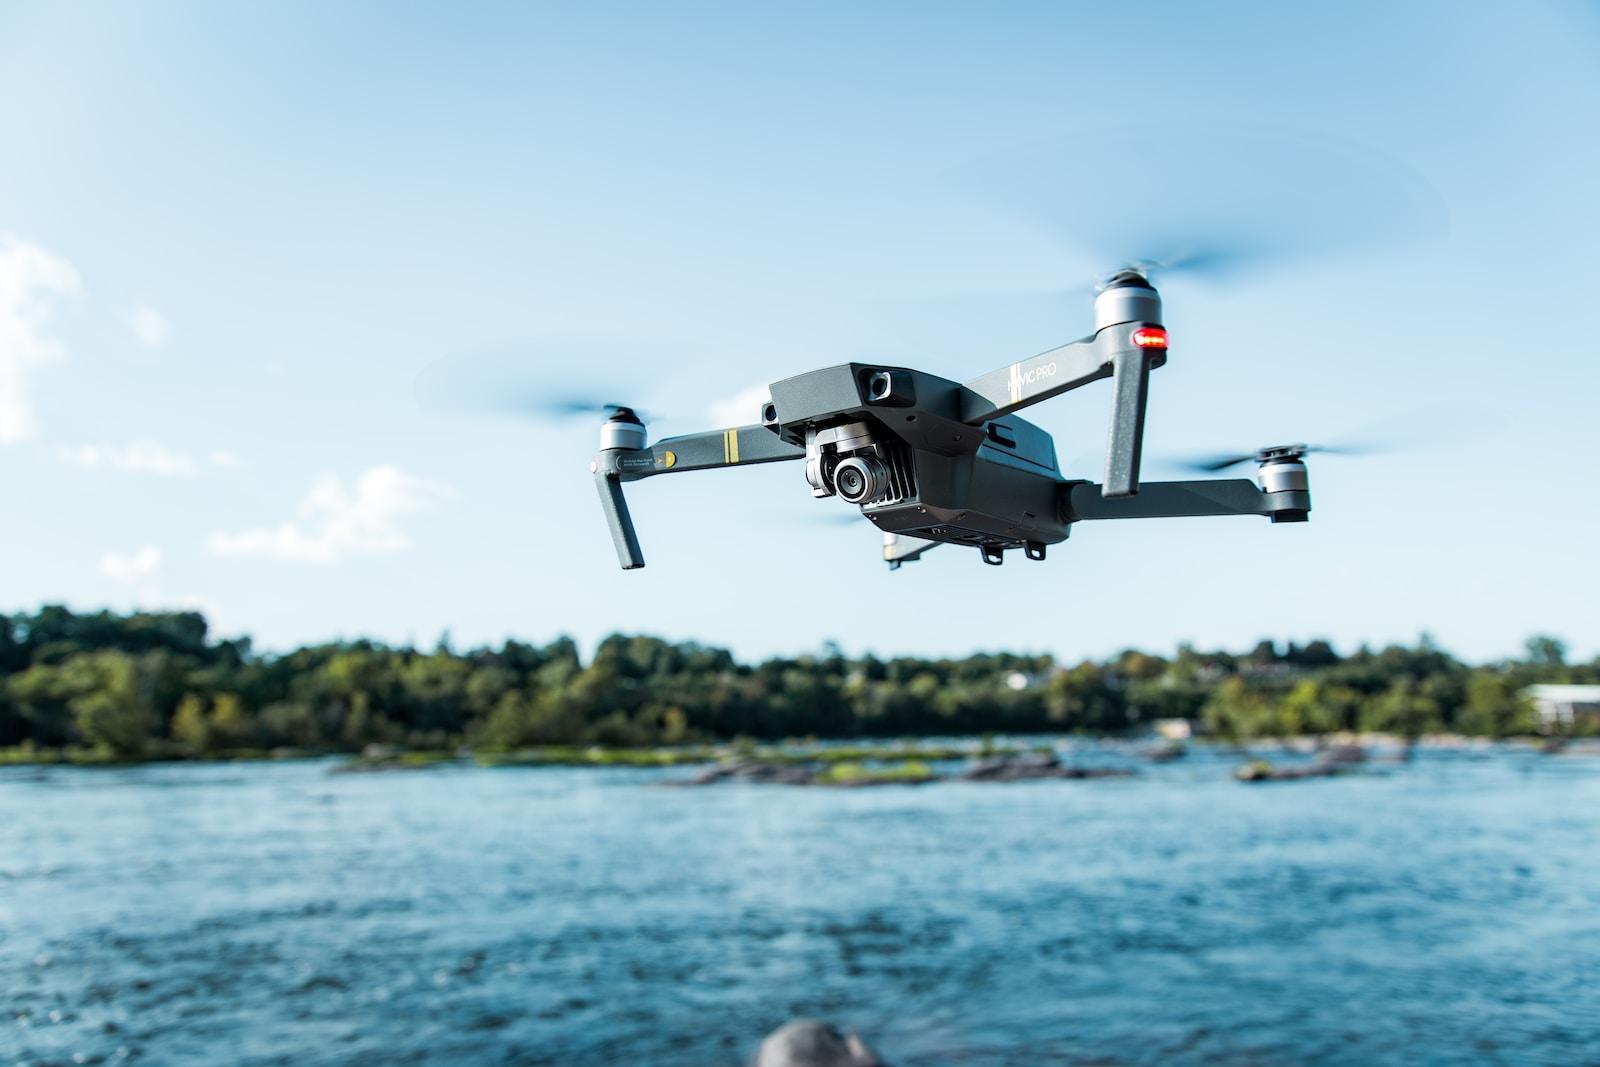 Geographers use drones